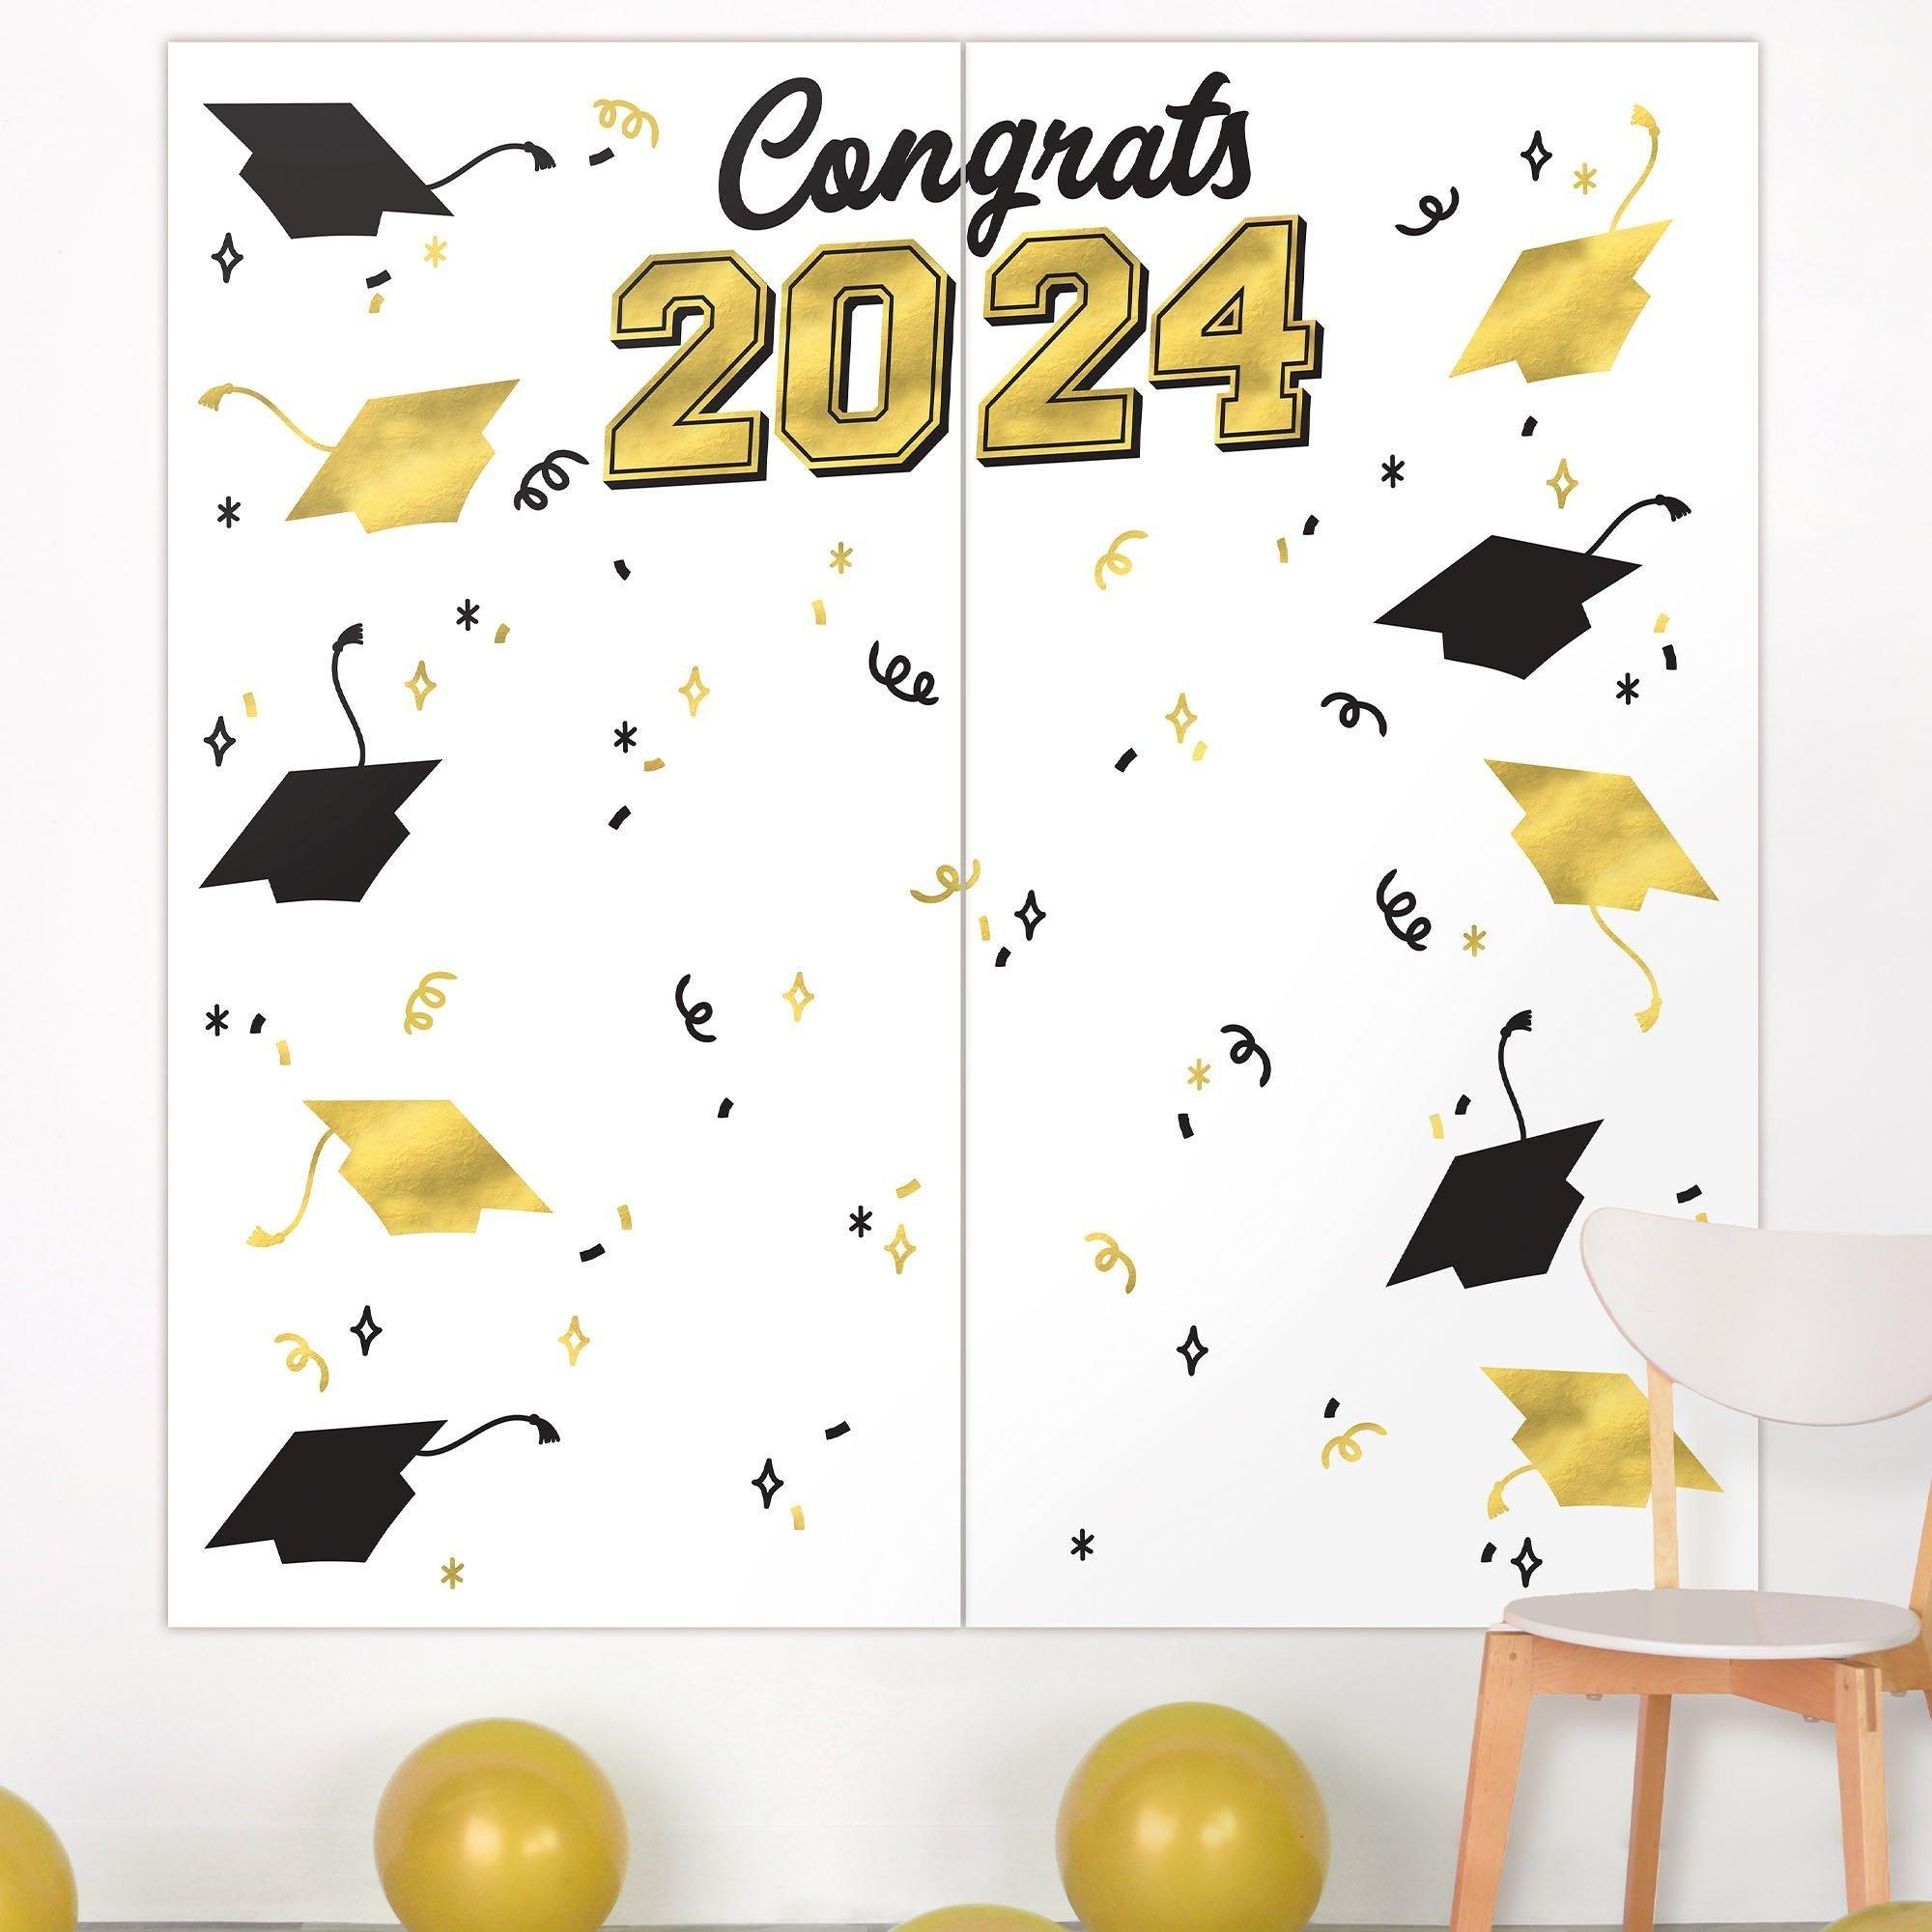 Graduation Party Supplies Kit for 80 with Decorations, Banners, Balloons, Plates, Napkins - White Congrats Grad